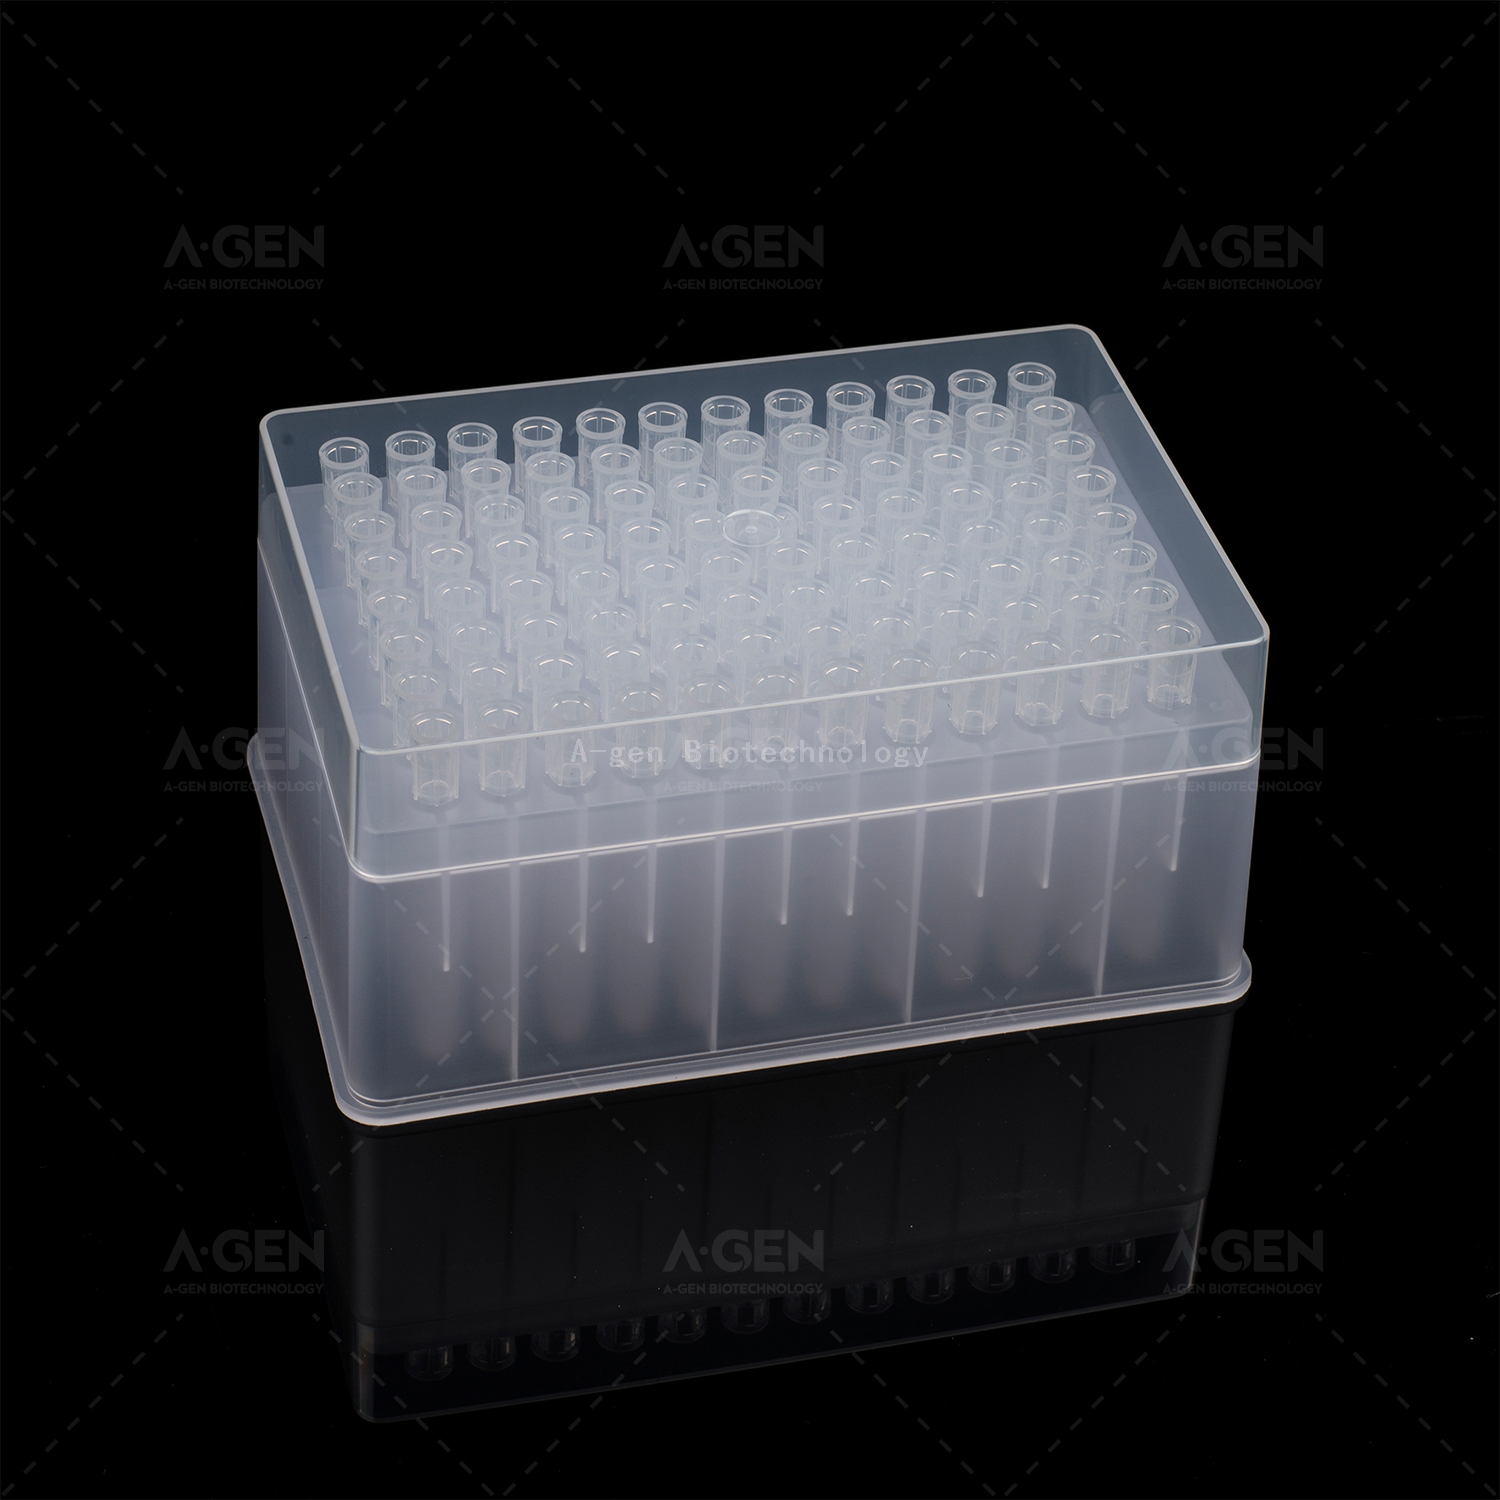 BECKMAN Tips 50μL Clear Robotic PP Pipette Tip (Racked,sterile) for DNA/RNA Extraction No Filter